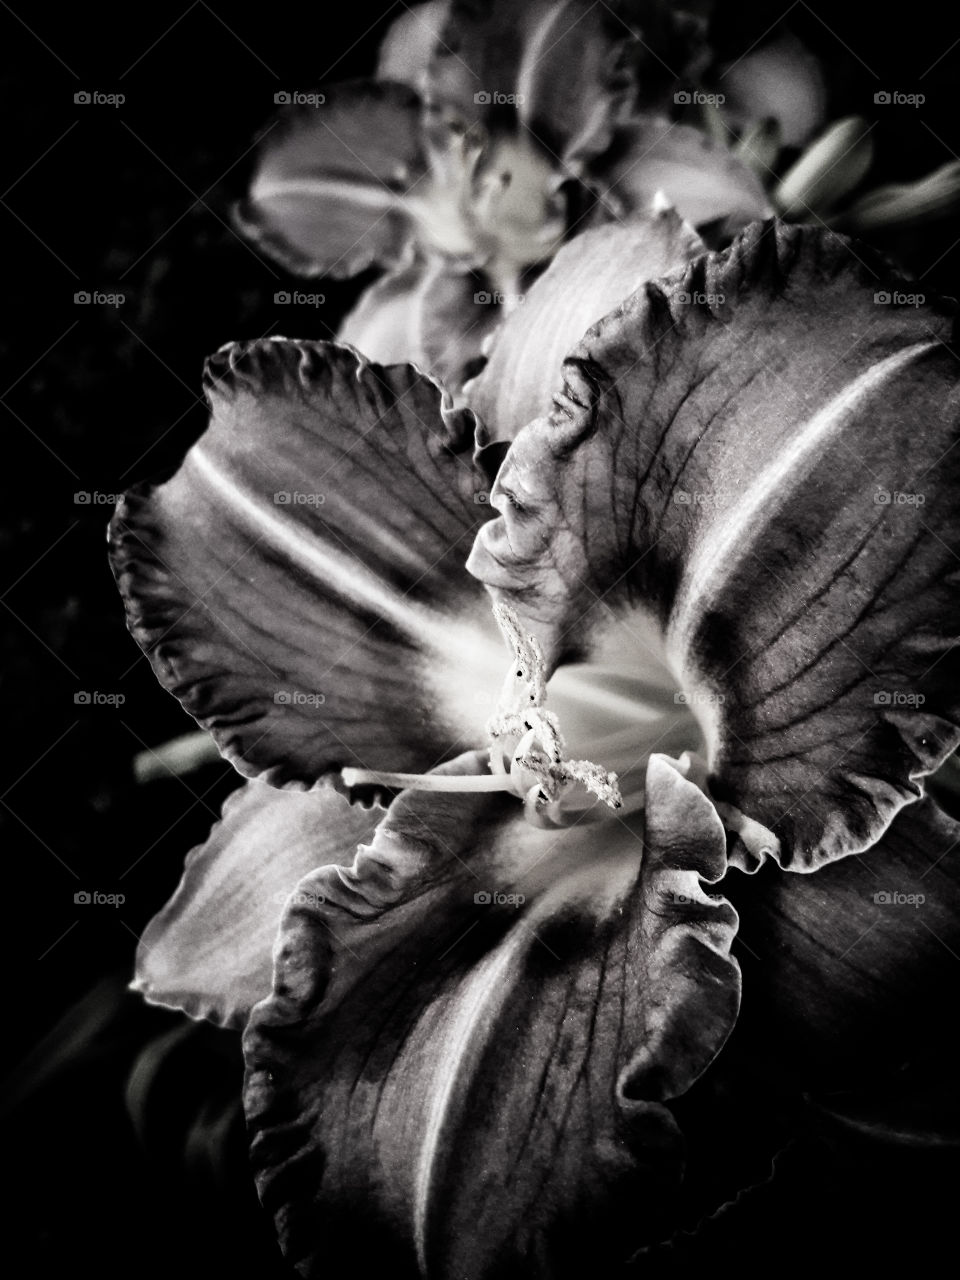 High contrast B&W photograph of lilies with ruffled edges.